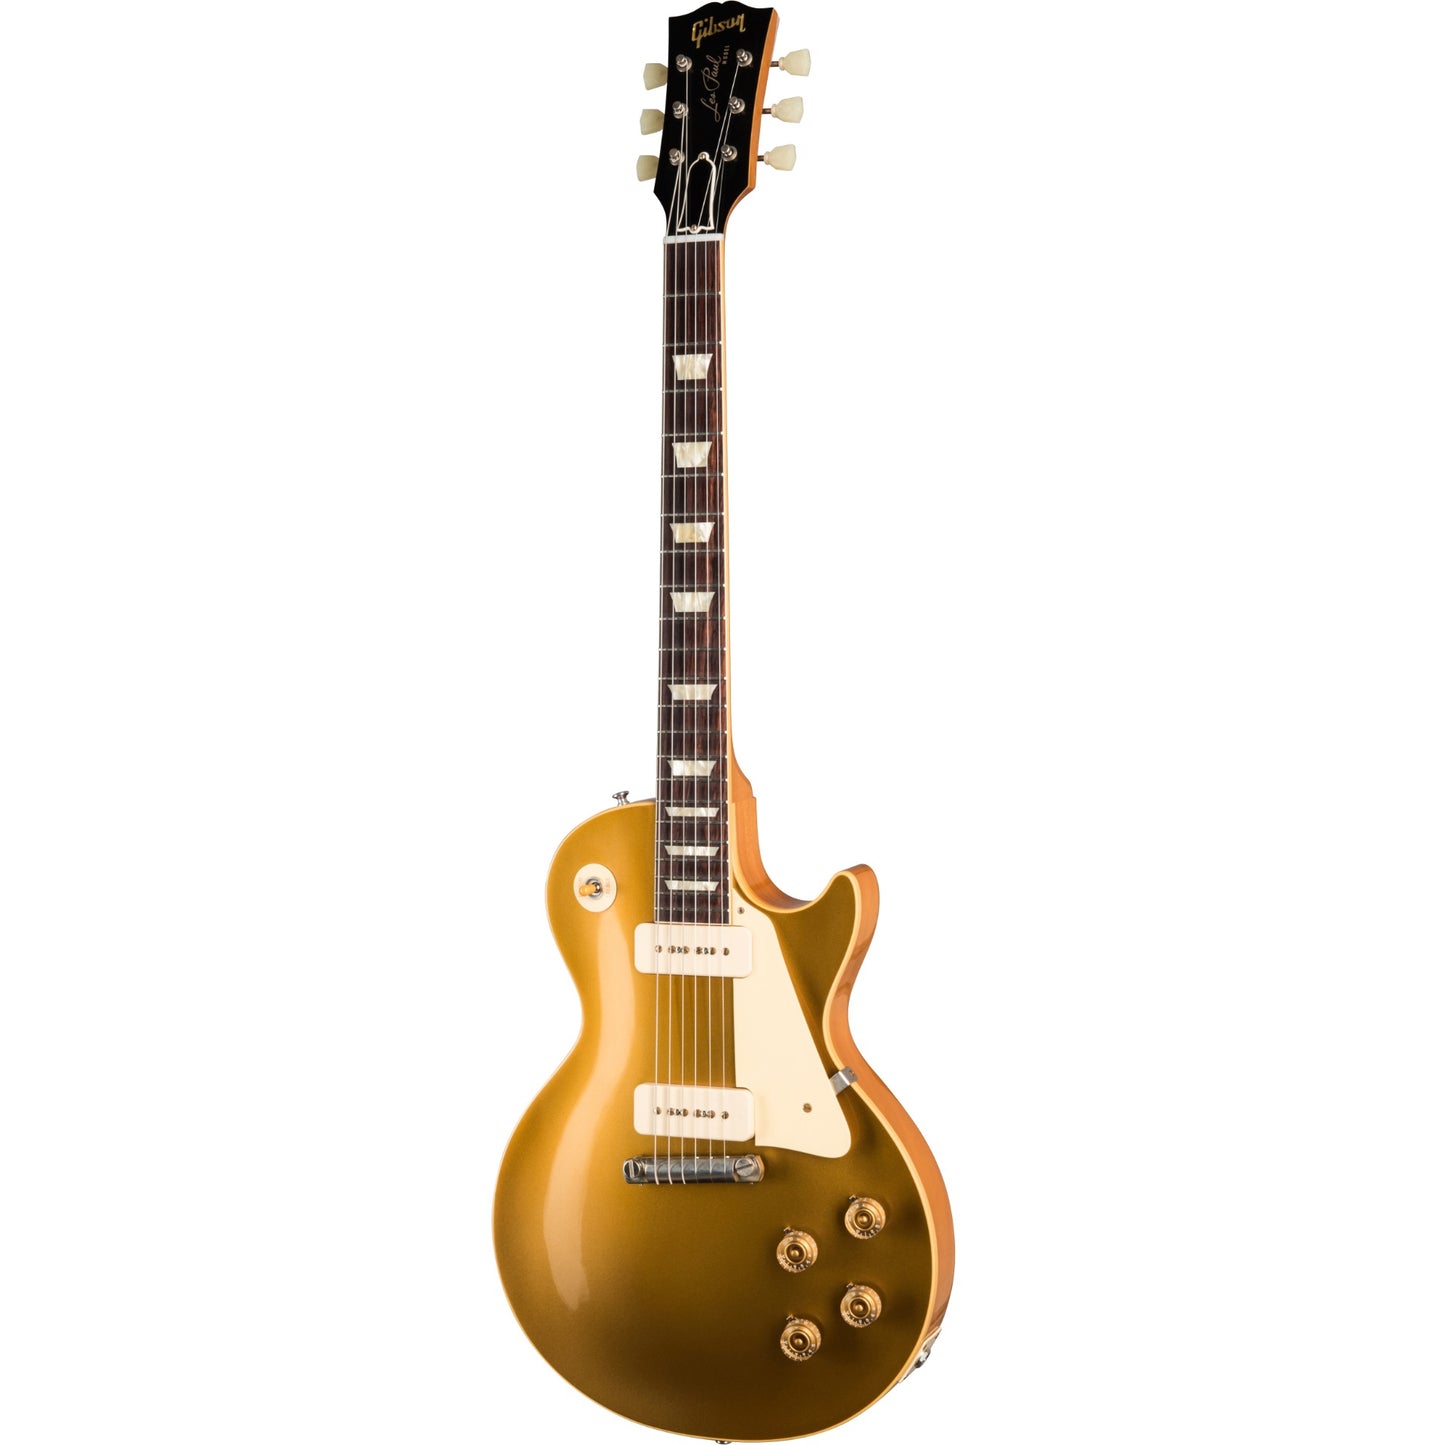 Gibson Custom 1954 Les Paul Goldtop Reissue VOS Electric Guitar - Double Gold